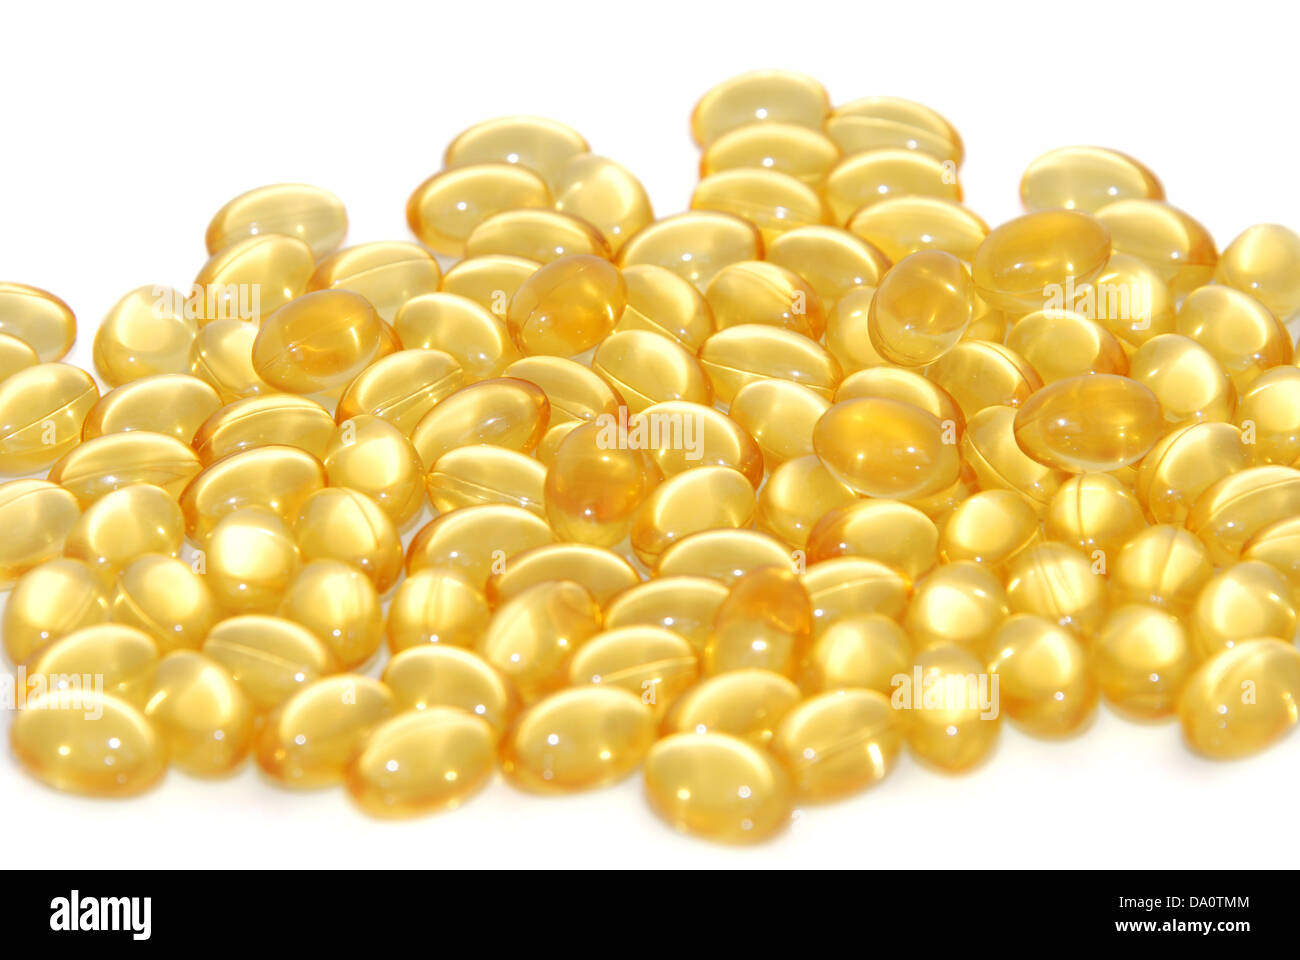 Cod Liver Oil Capsules A Source Of Vitamin D And Omega 3